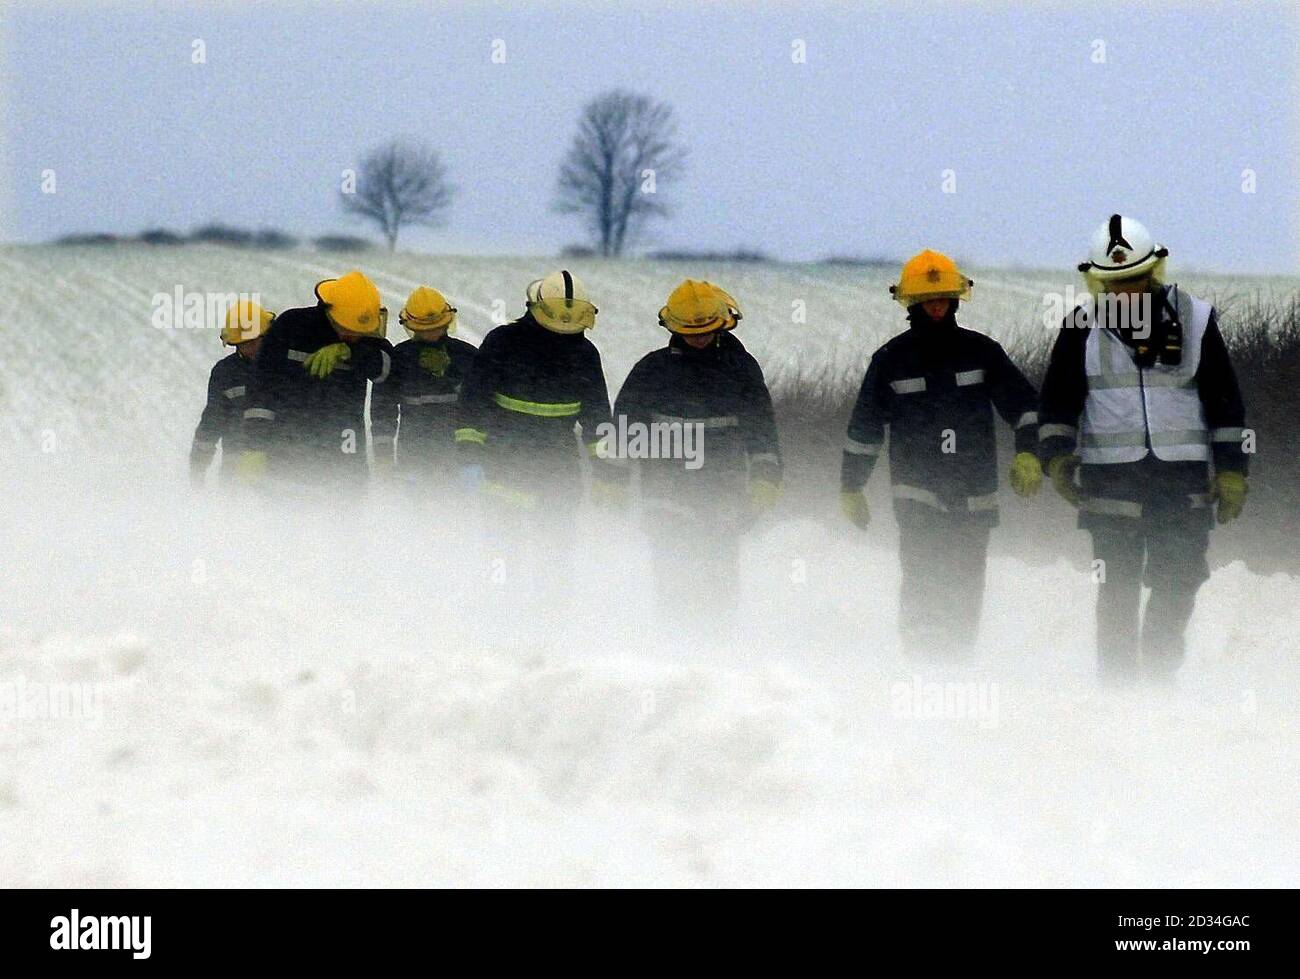 Fire crews make their way through blizzards to help rescue motorists trapped in snow drifts and blizzards near Market Weighton, Yorkshire, Friday December 30, 2005, as the UK braces itself for the last of the wintry conditions before the end of the current cold snap. An inch of snow was forecast in eastern regions, while winds of up to 35mph in areas of north east England and Scotland were expected to create blizzard conditions. See PA Story WEATHER Snow. PRESS ASSOCIATION Photo. Photo credit should read: John Gilesr/PA Stock Photo